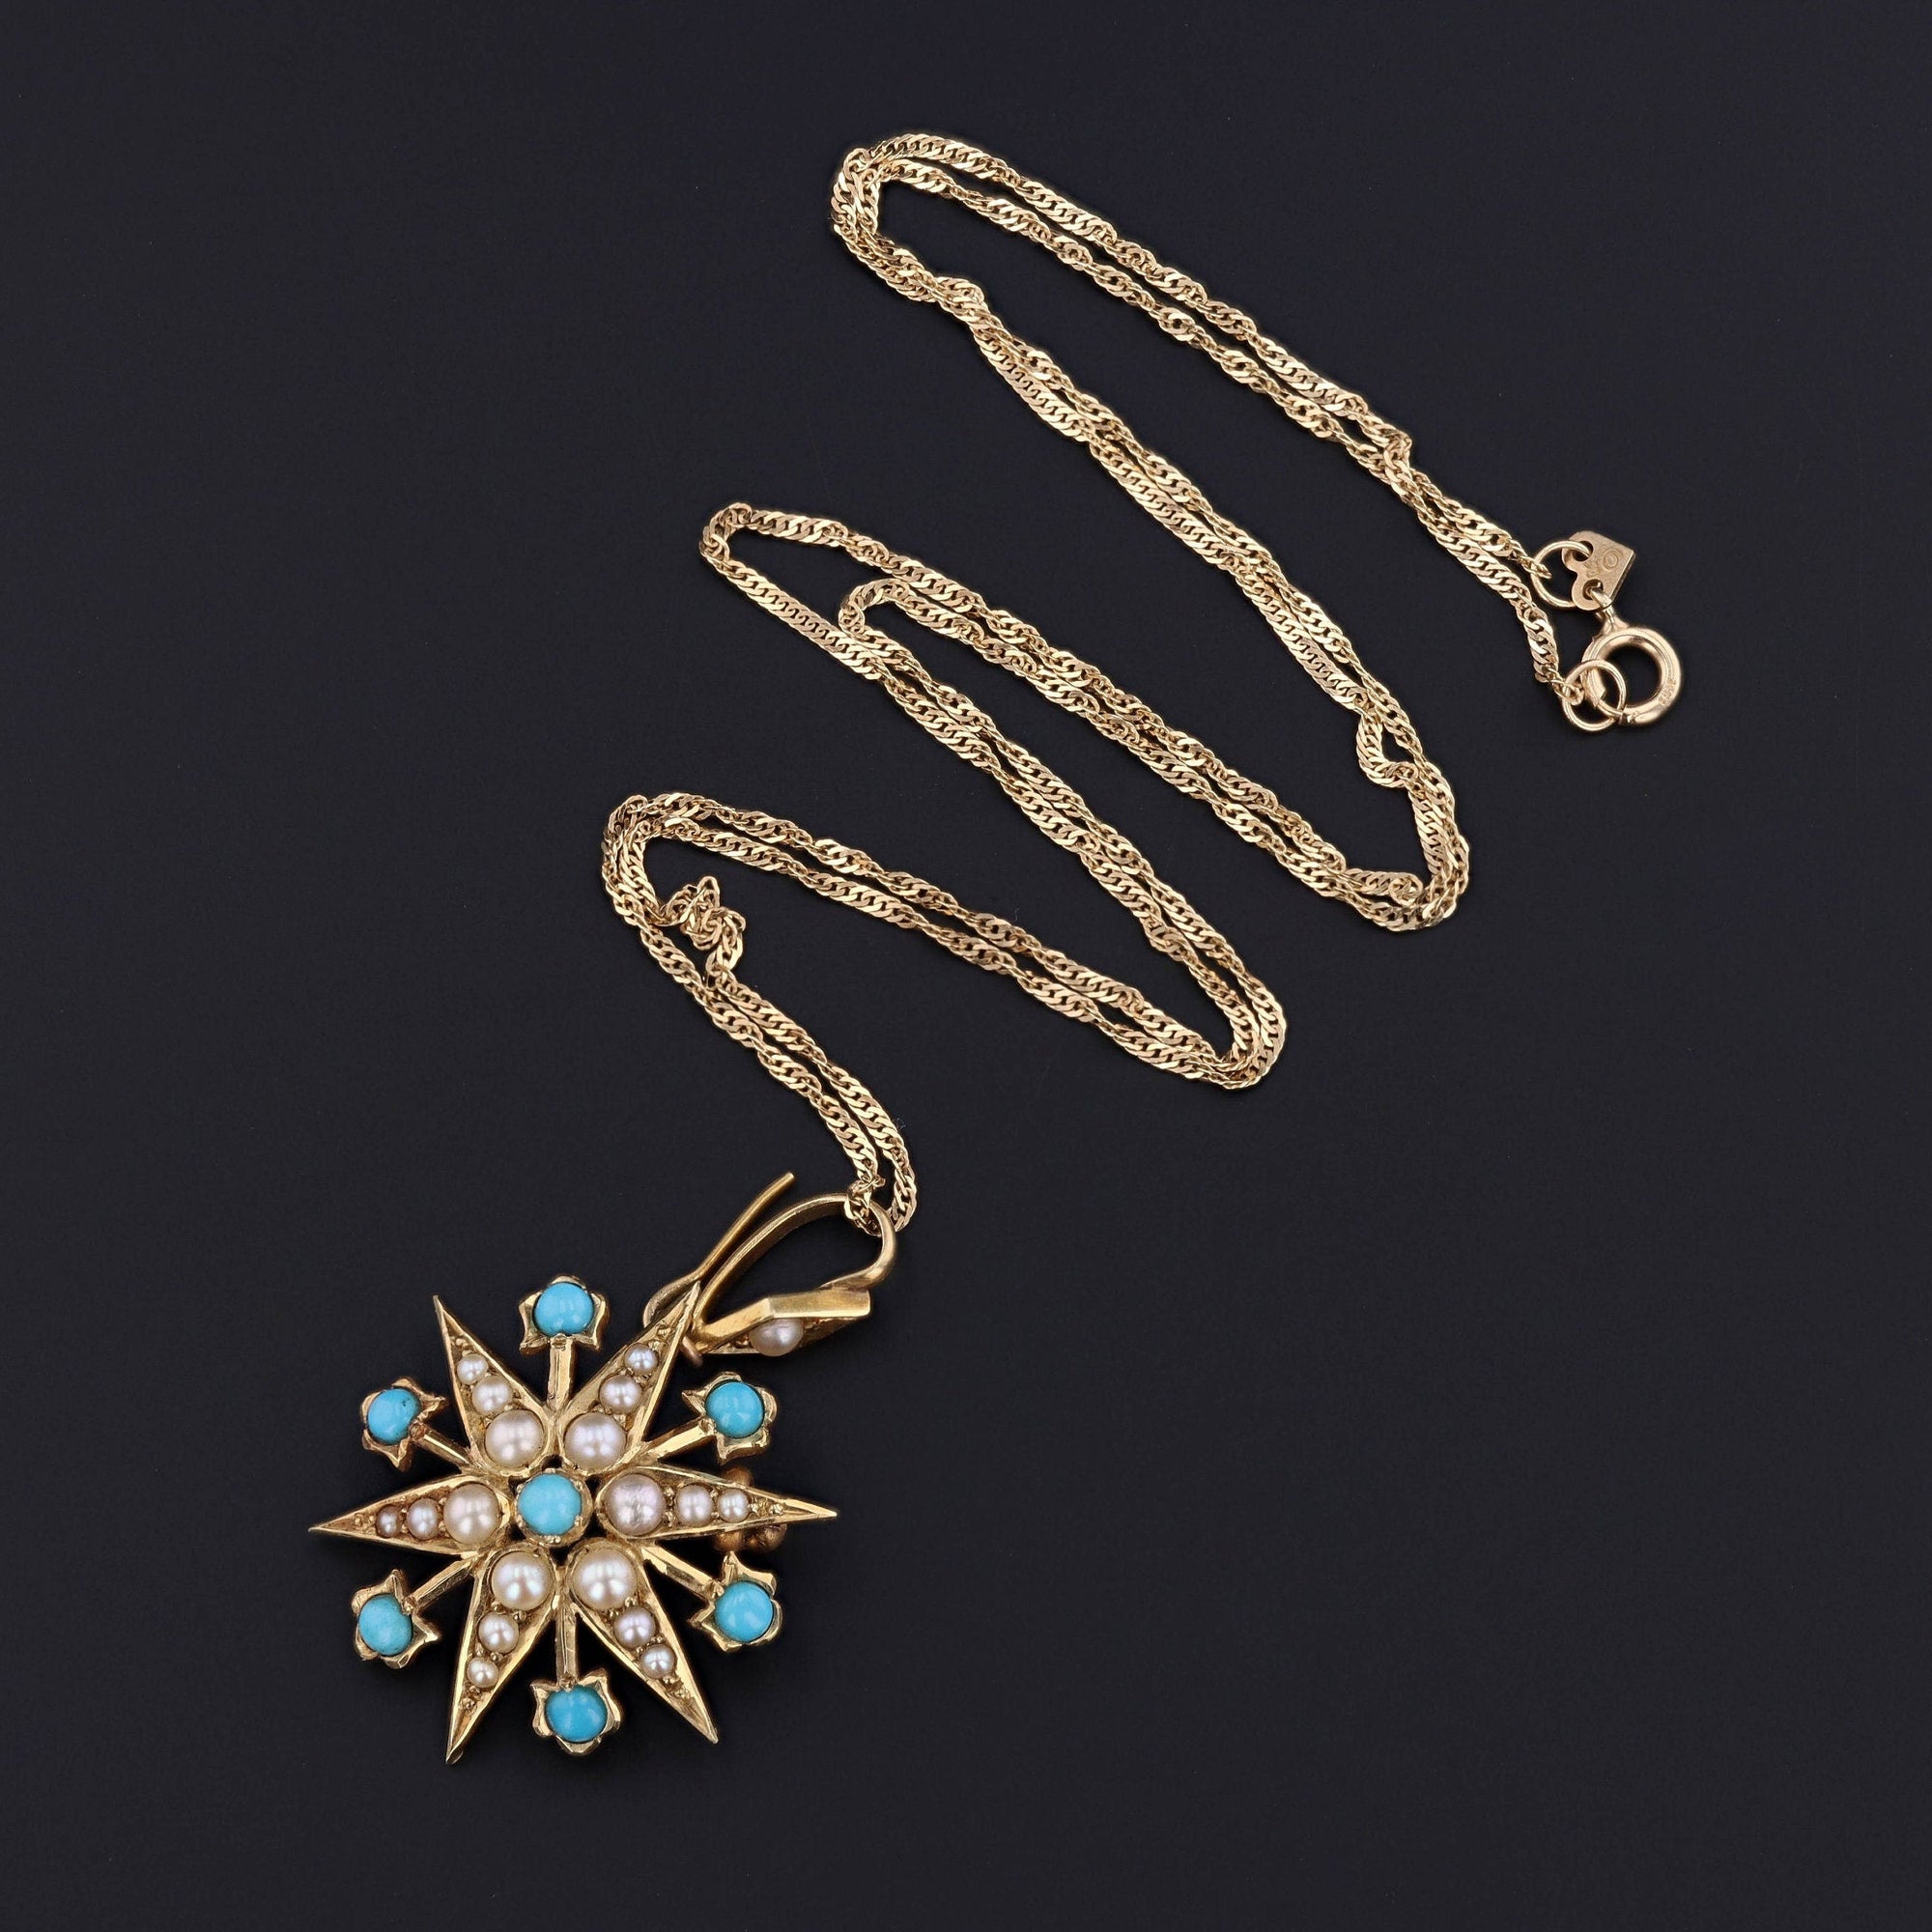 Antique Turquoise & Pearl Star Brooch or Pendant | 14k Gold Pendant on Optional 14k Chain 